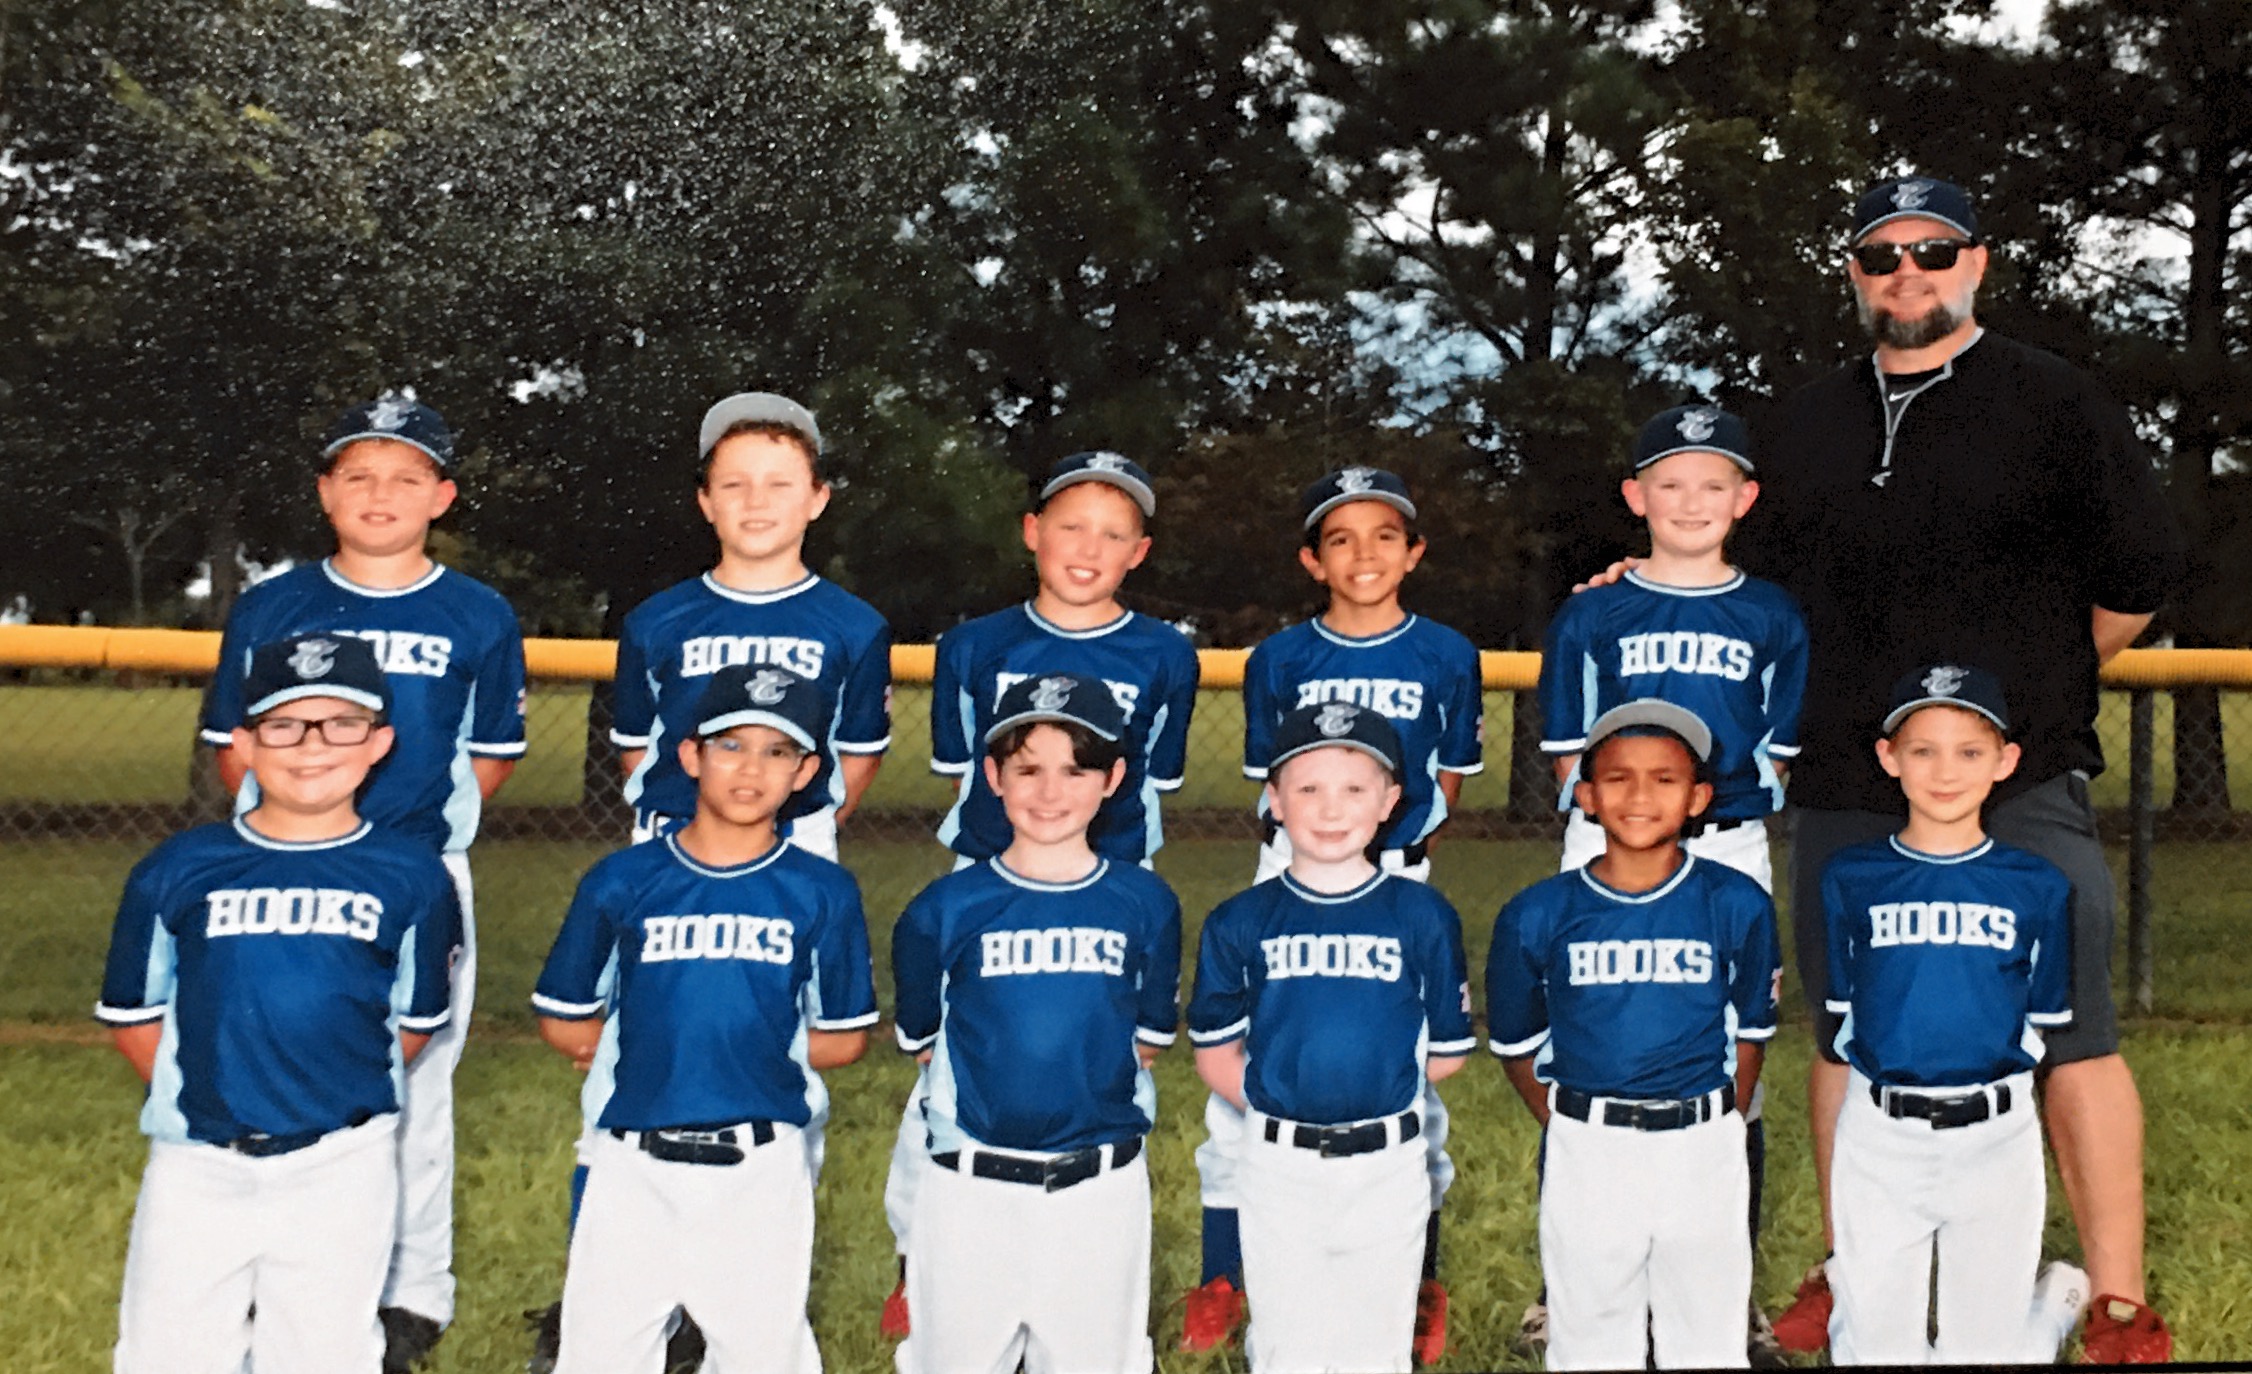 Picture of my team the hooks  2020-2021 9 year old Katy American Little League 2021